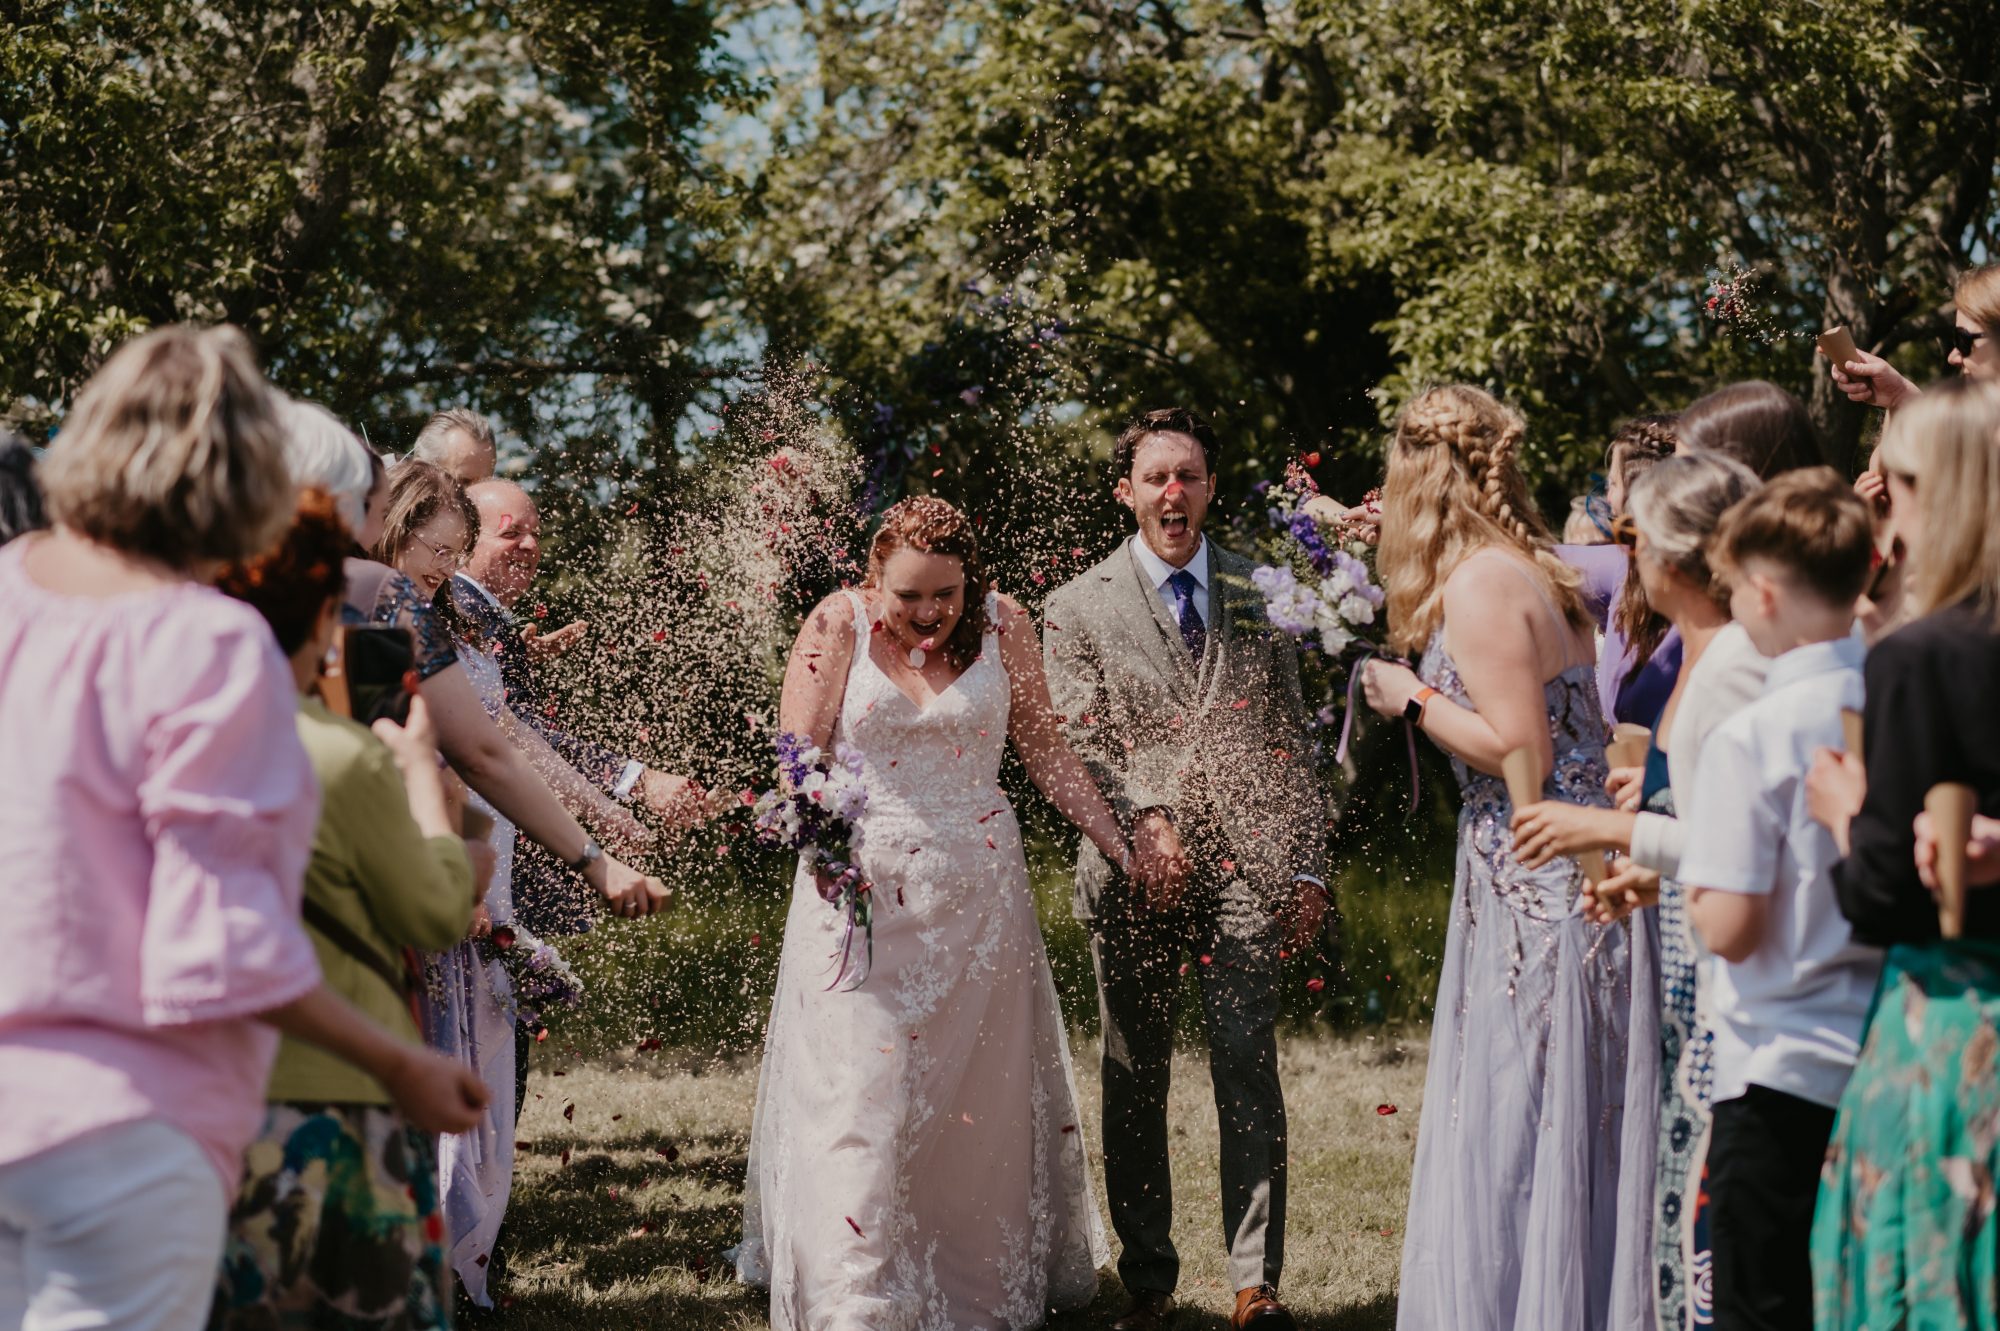 A bride and groom walking amongst confetti